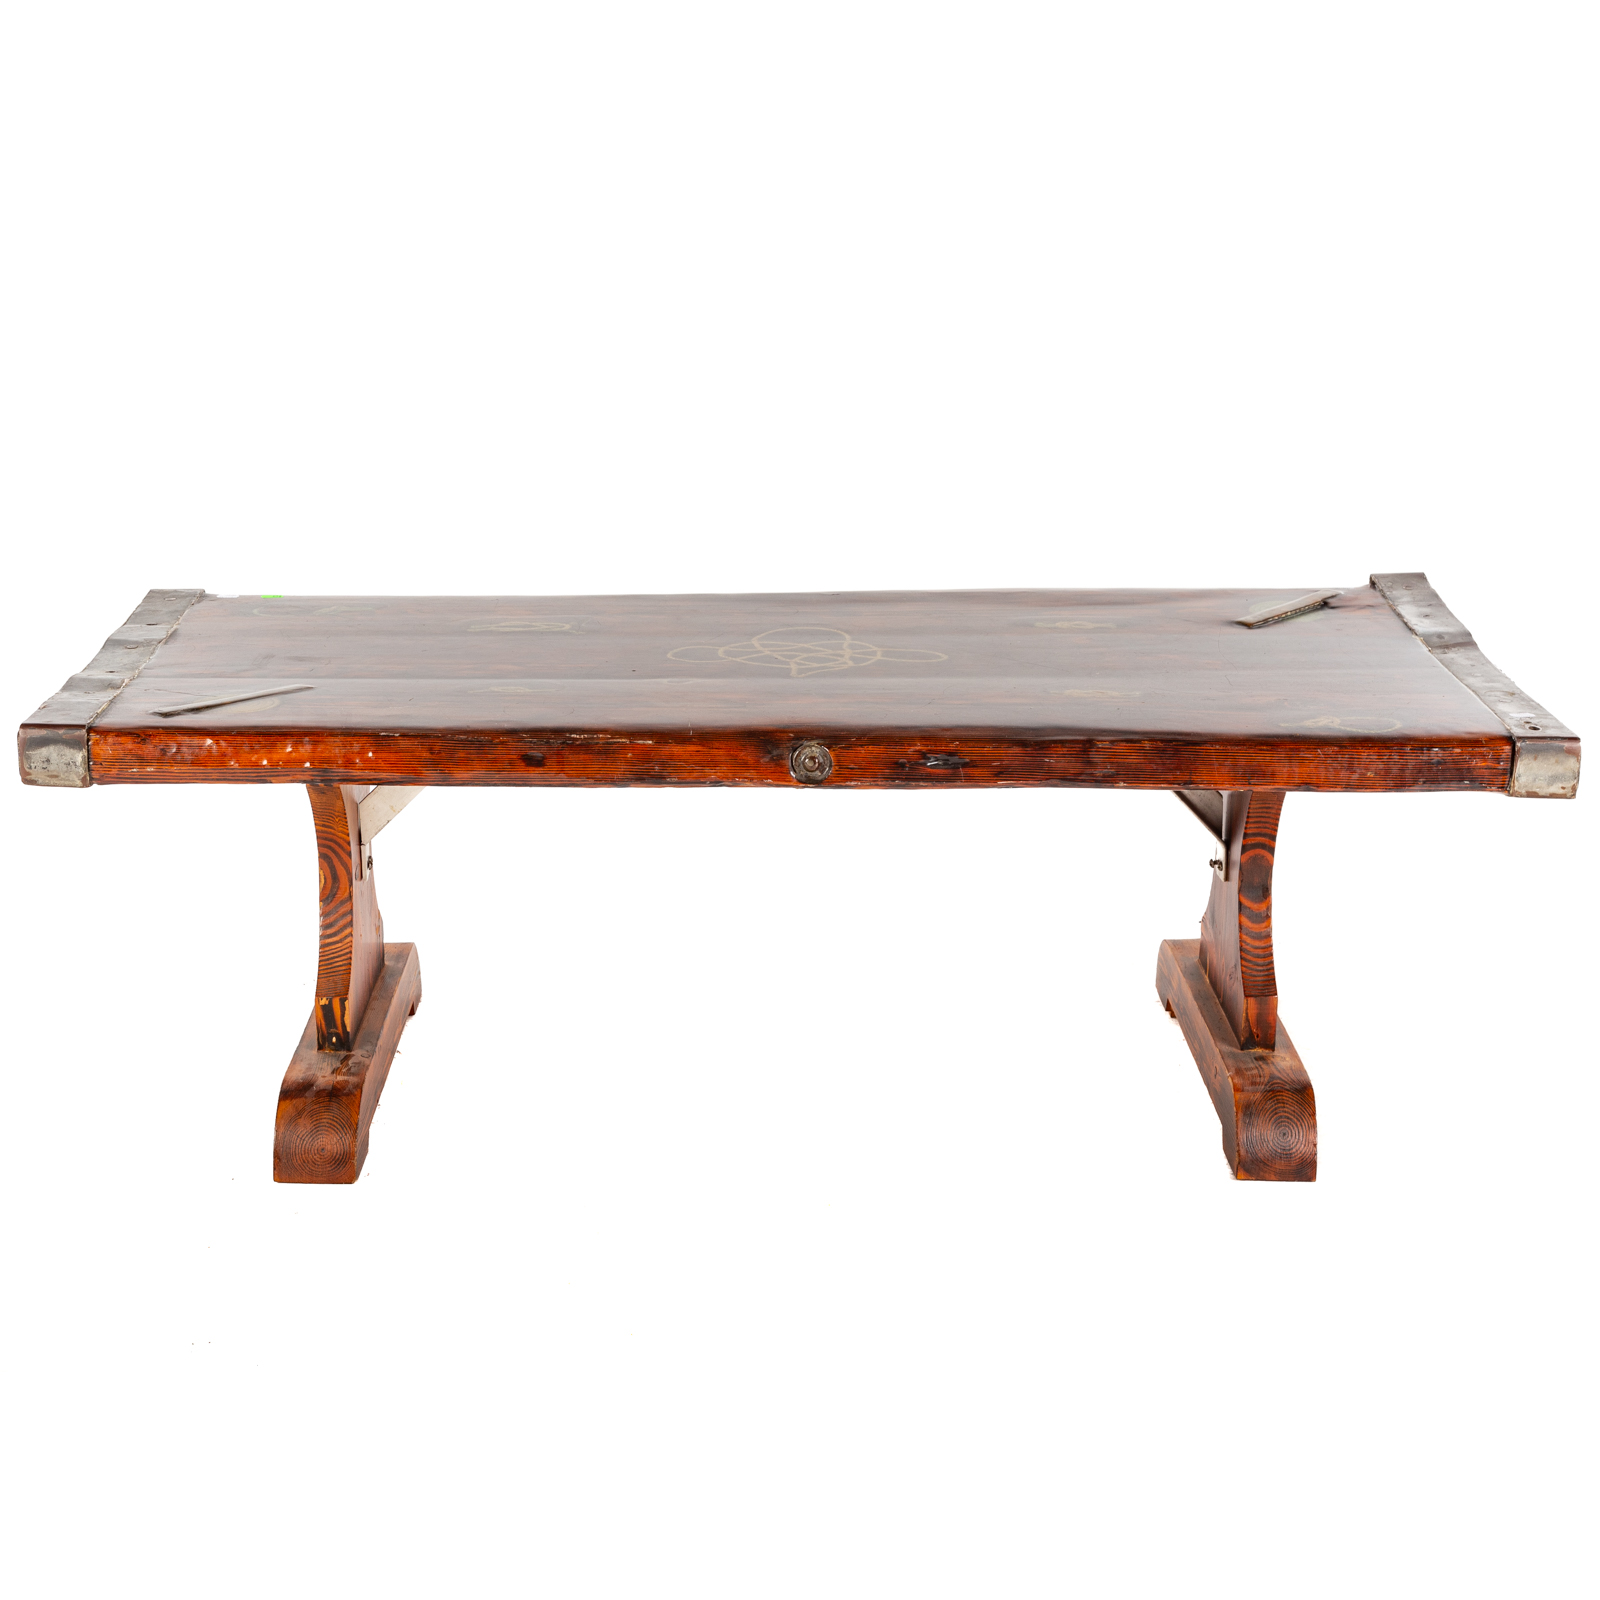 SHIP S HATCH COFFEE TABLE Early 3cadfc